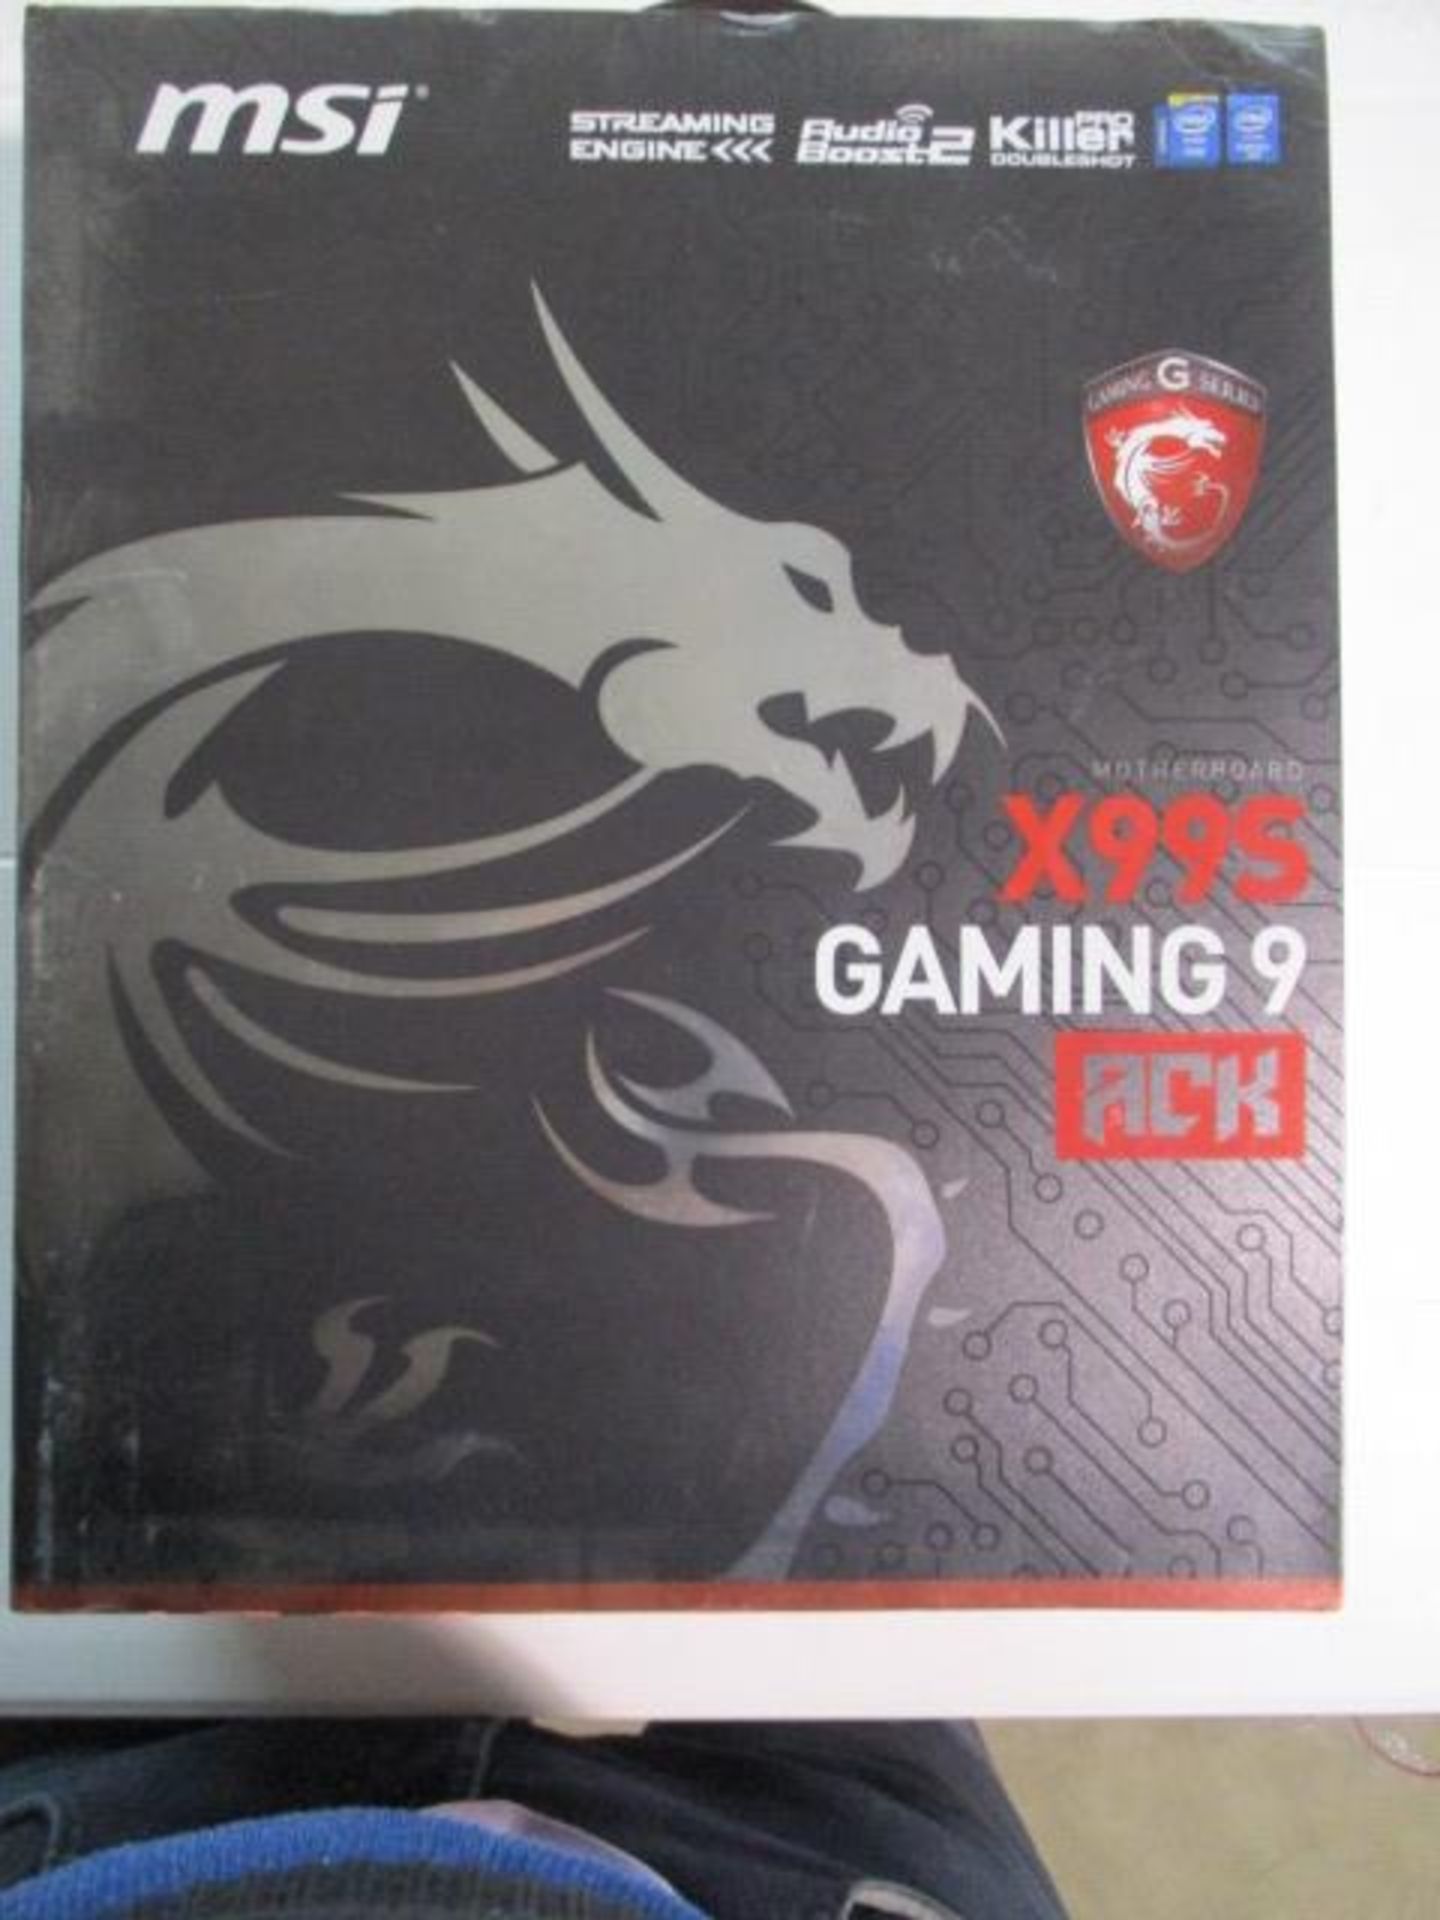 Msi Gaming X99s Streaming Engine Motherboard boxed and unchecked rrp £150+